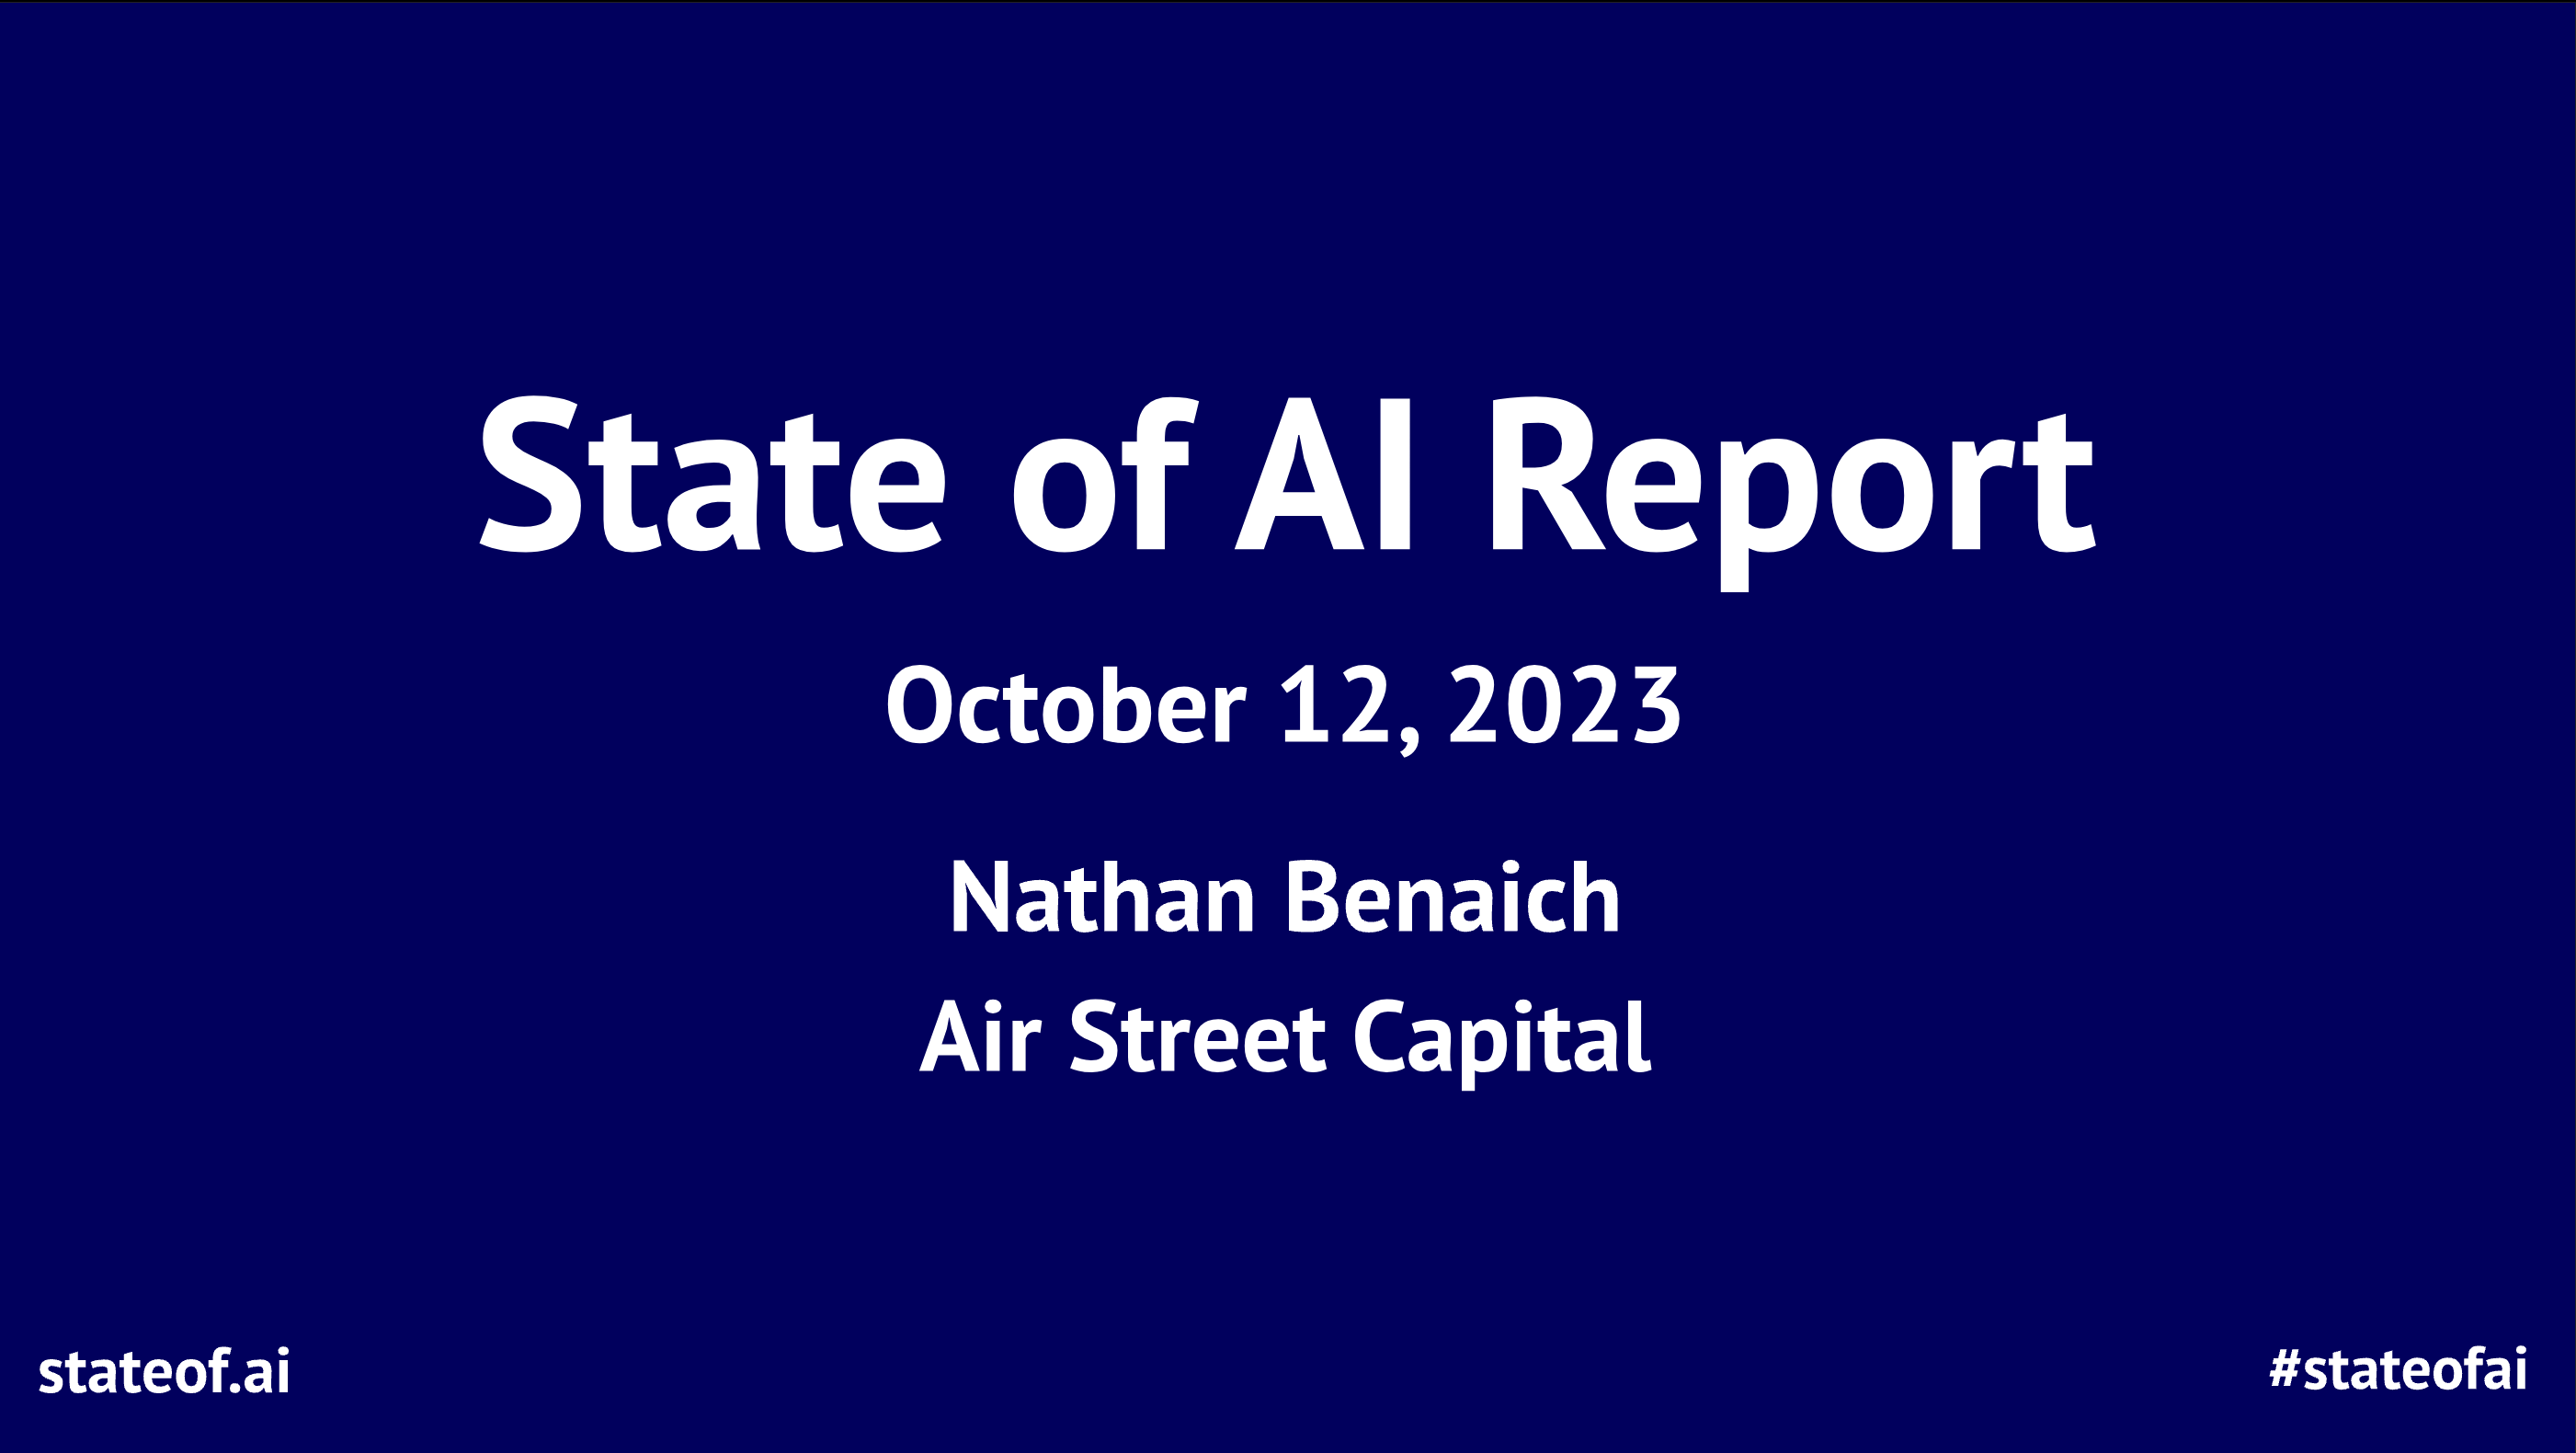 State of AI 2023, Download the report (PDF)